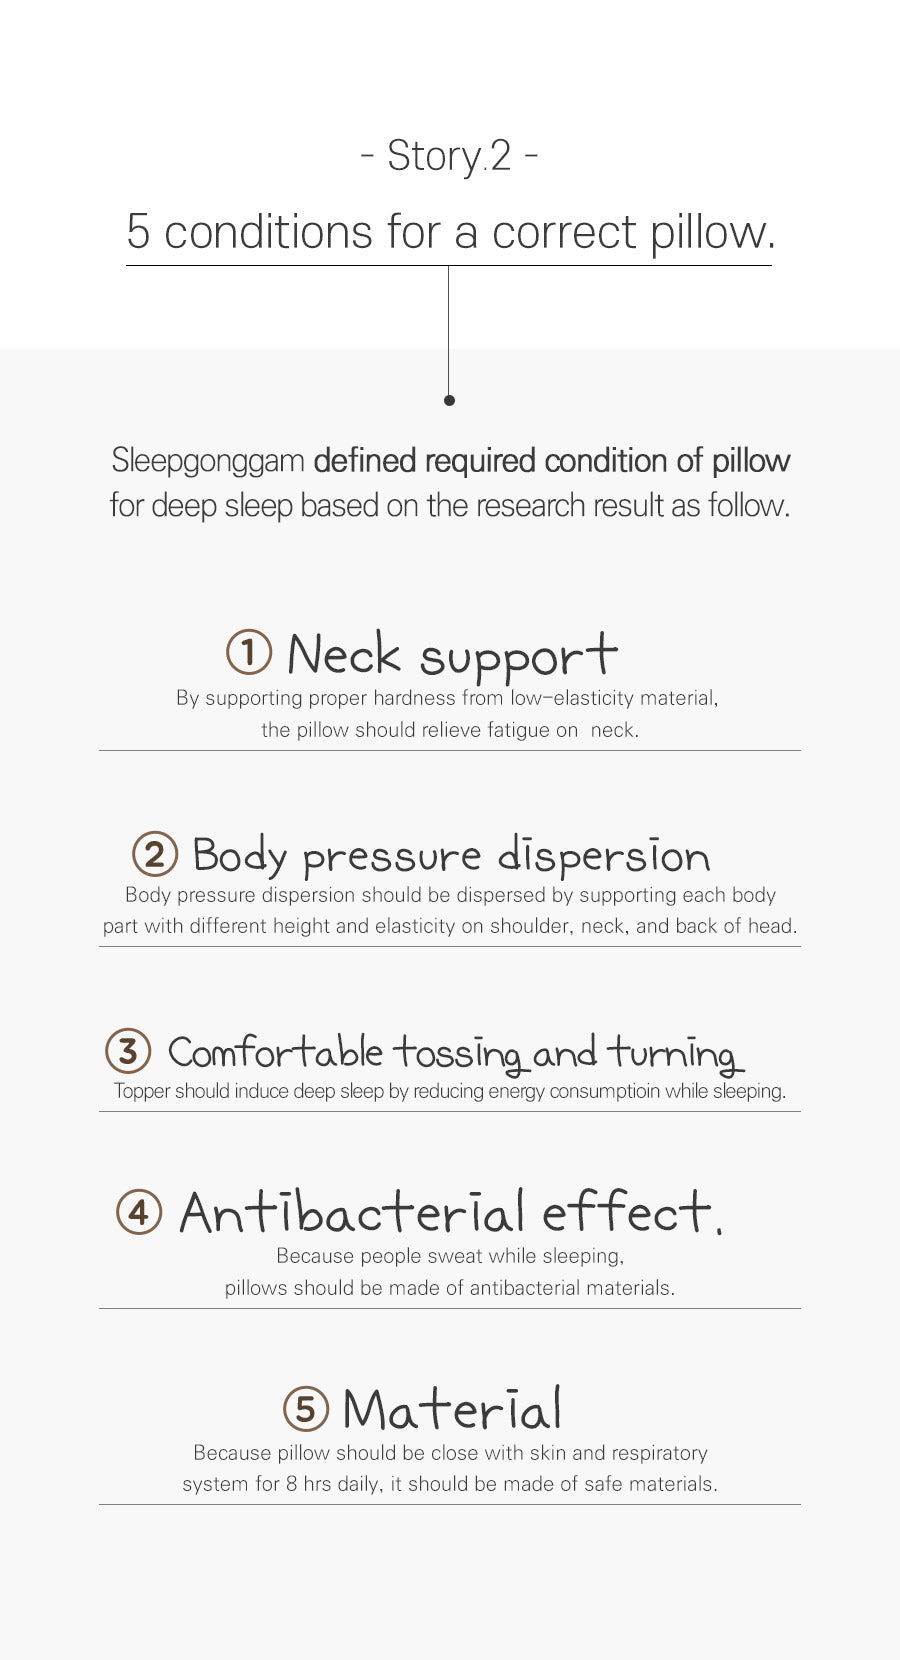 5 Conditions for a correct pillow - neck support, body pressure dispersion, comfortable tossing and turning, antibacterial effect, Material.